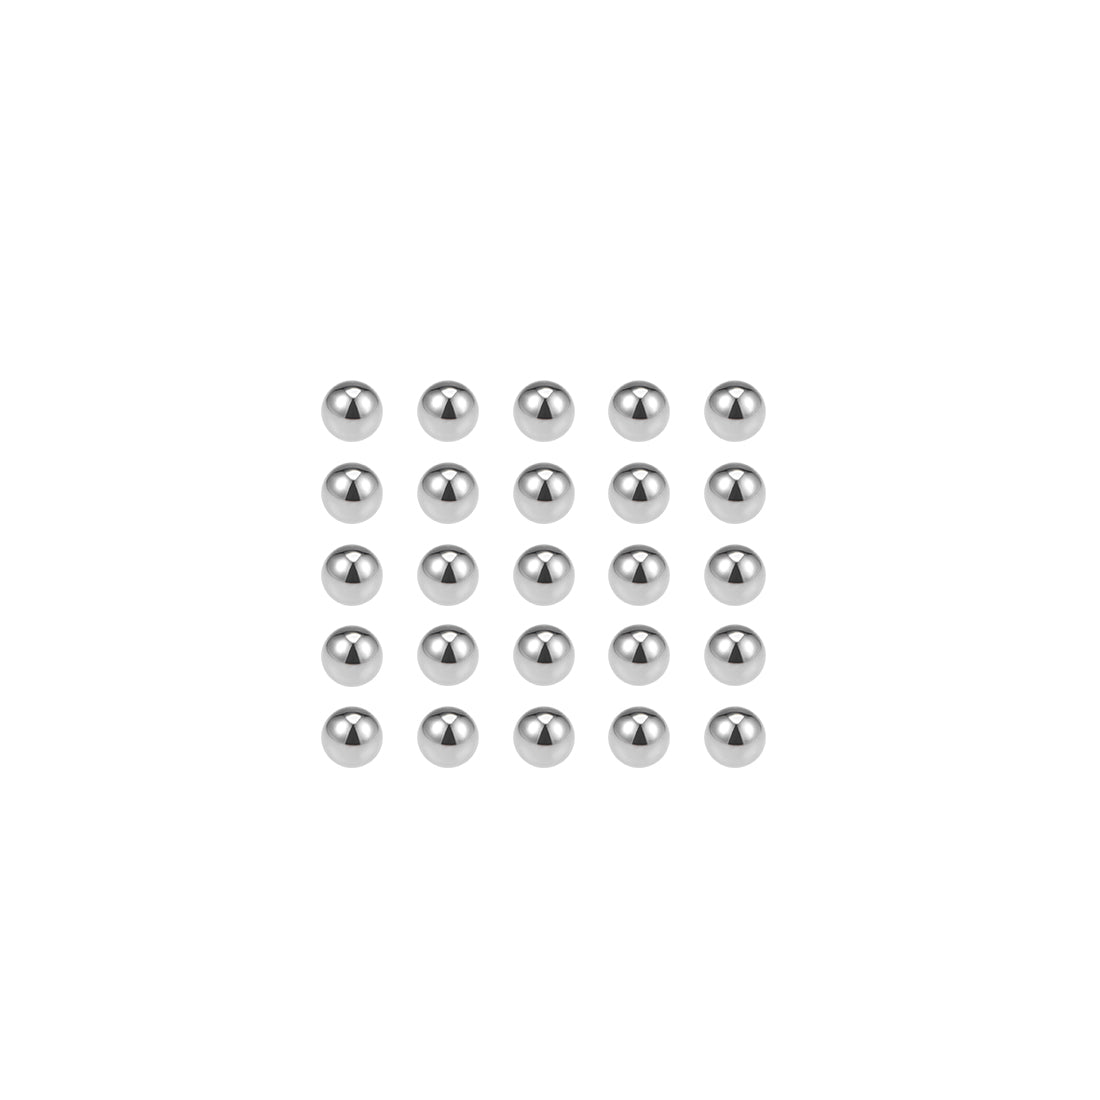 uxcell Uxcell Precision Balls 1/8" Solid Chrome Steel G25 for Ball Bearing Wheel 200pcs